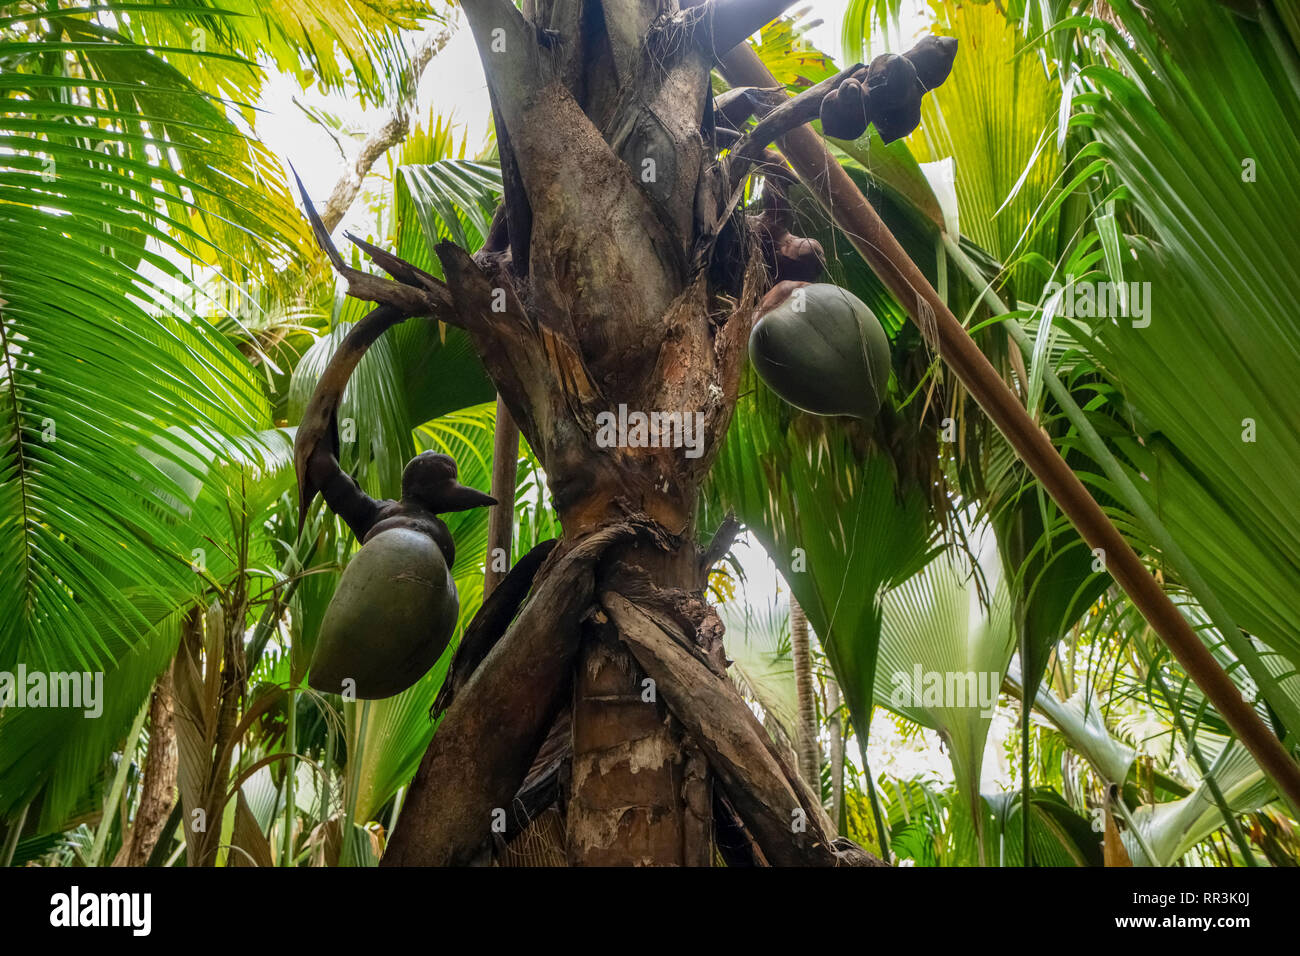 Coco de mer (Lodoicea maldivica). This is the largest and heaviest seed in the world. It can weigh up to 30 kilograms. Photographed in the Seychelles. Stock Photo